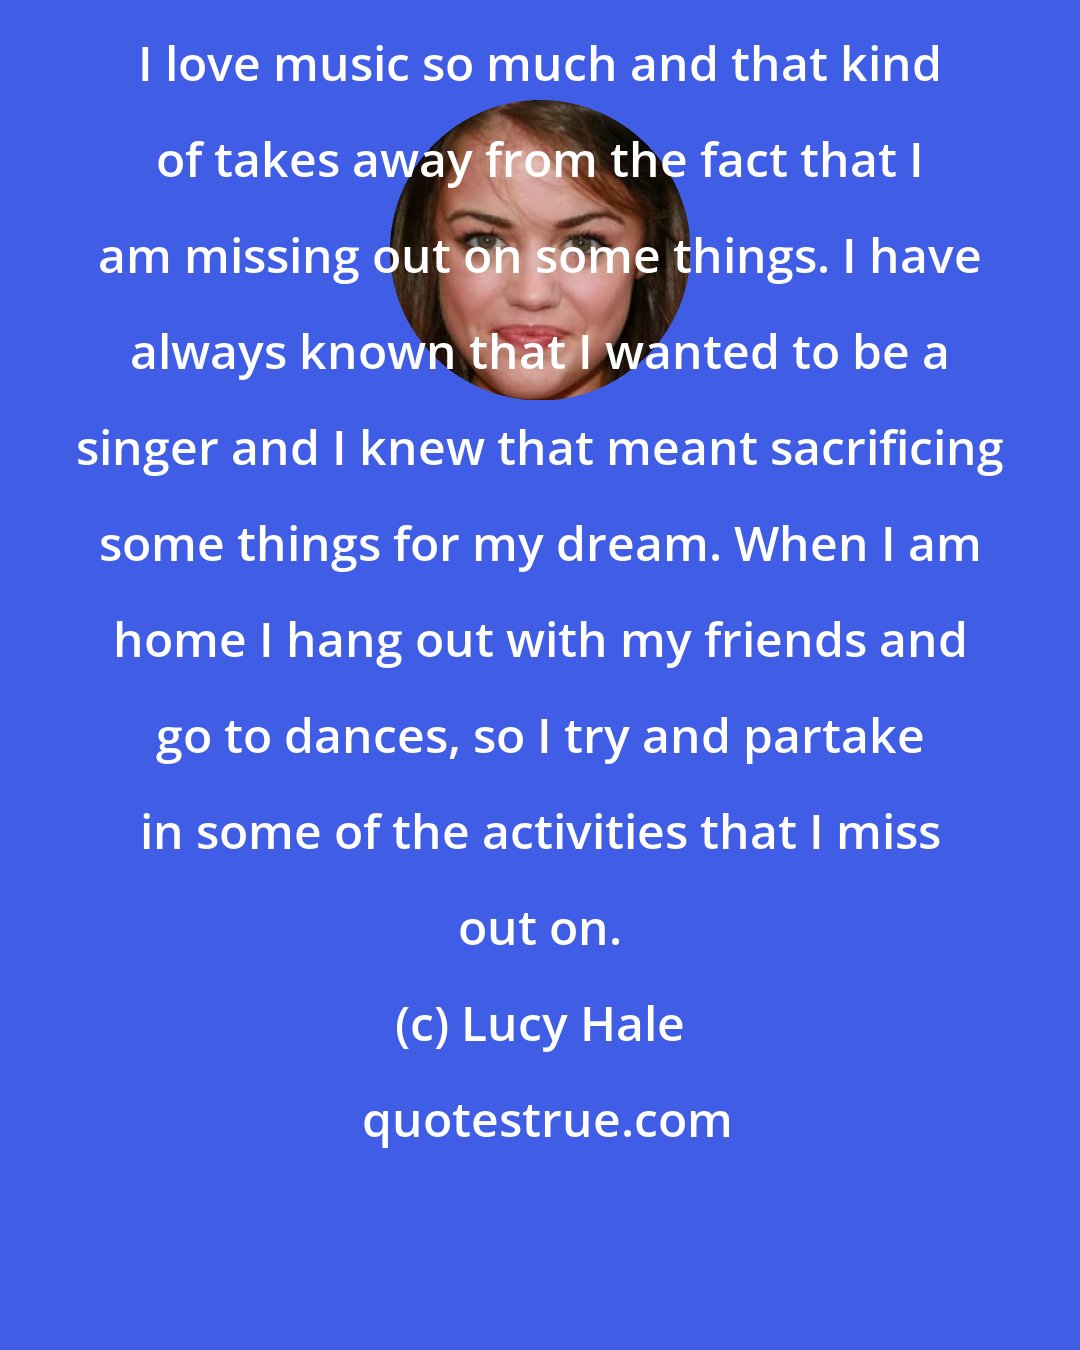 Lucy Hale: I love music so much and that kind of takes away from the fact that I am missing out on some things. I have always known that I wanted to be a singer and I knew that meant sacrificing some things for my dream. When I am home I hang out with my friends and go to dances, so I try and partake in some of the activities that I miss out on.